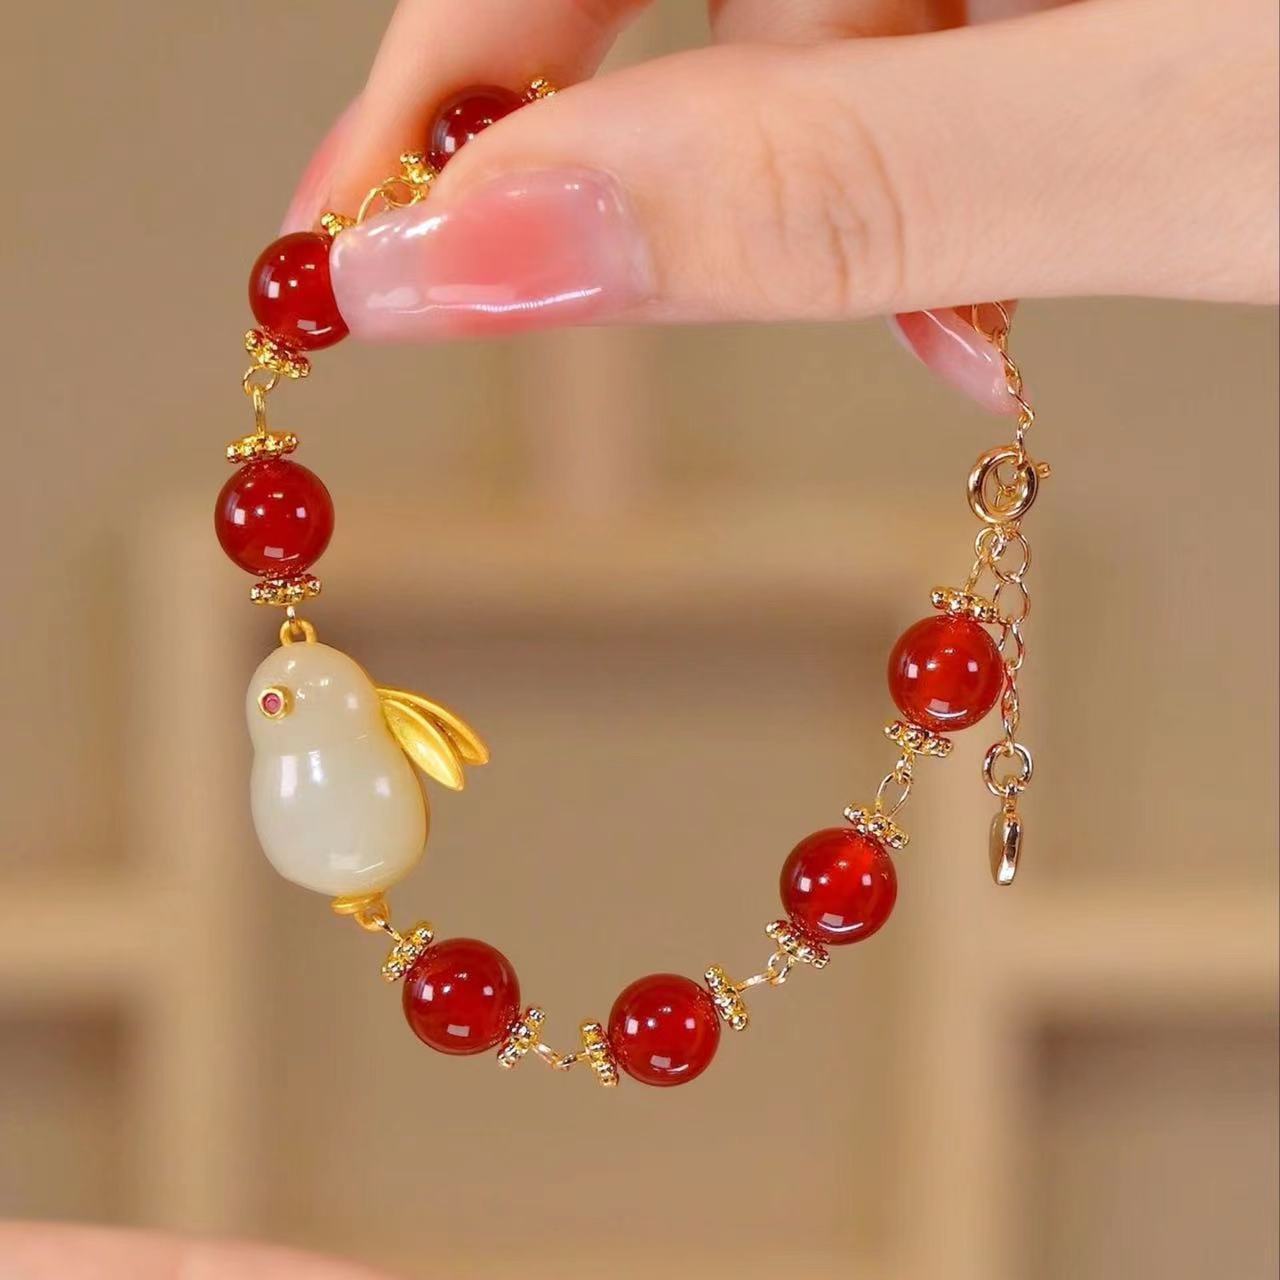 Hetian Jade NAFU Jade Hare Bracelet Girl's National Fashion Ancient Style Chinese Zodiac Sign of Rabbit Internet Celebrity Carrying Strap Red Bean Agate Gift